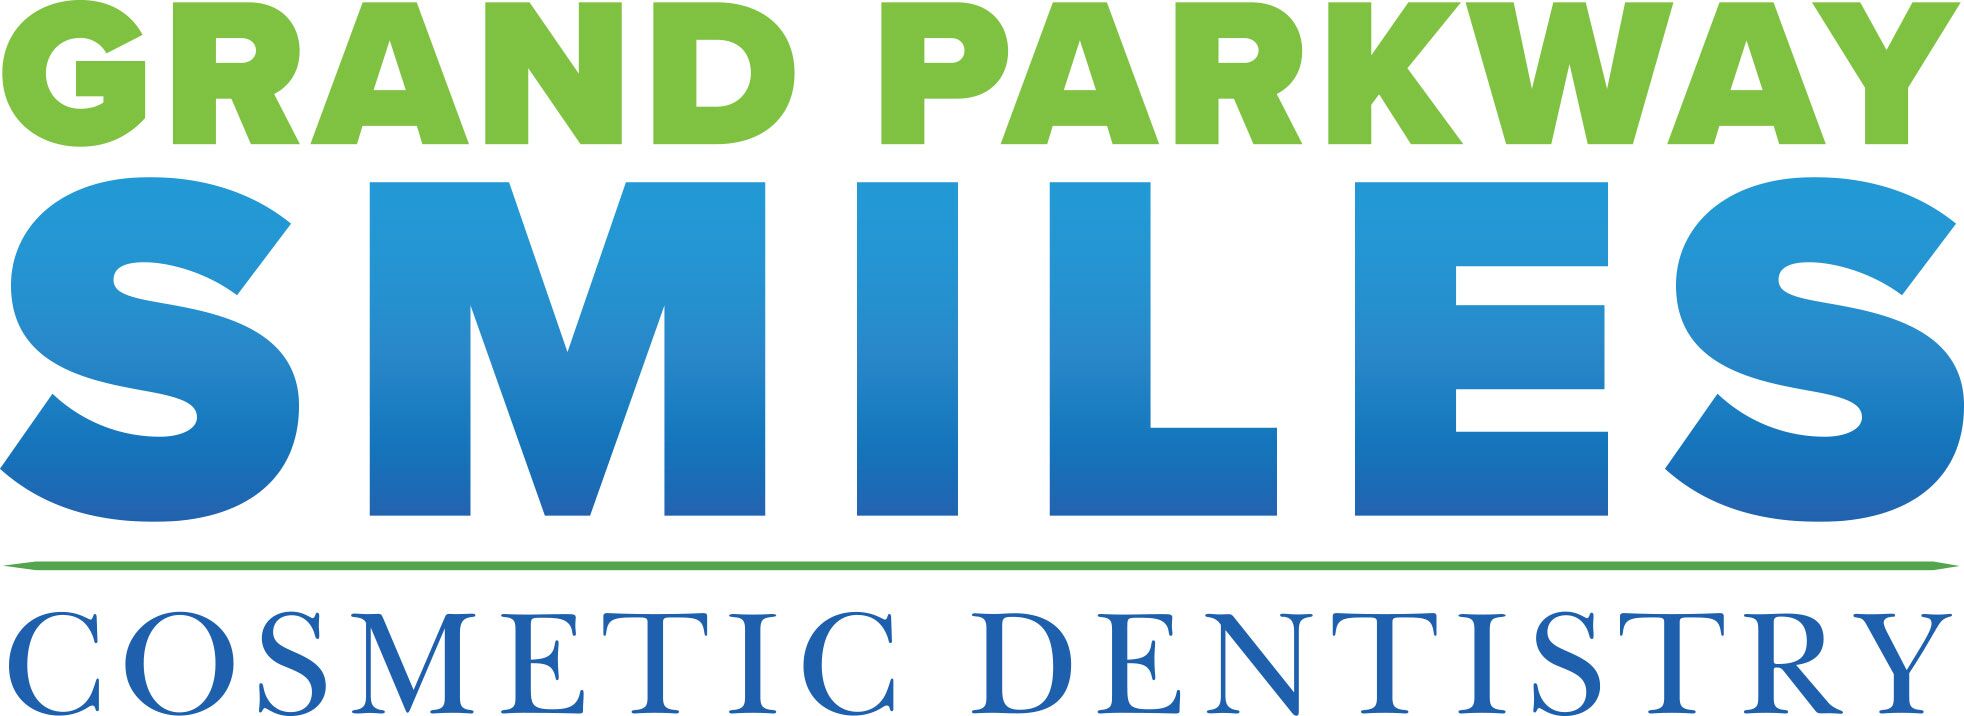 The Dentists And Specialists Grand Parkway Smiles Katy Tx 77450